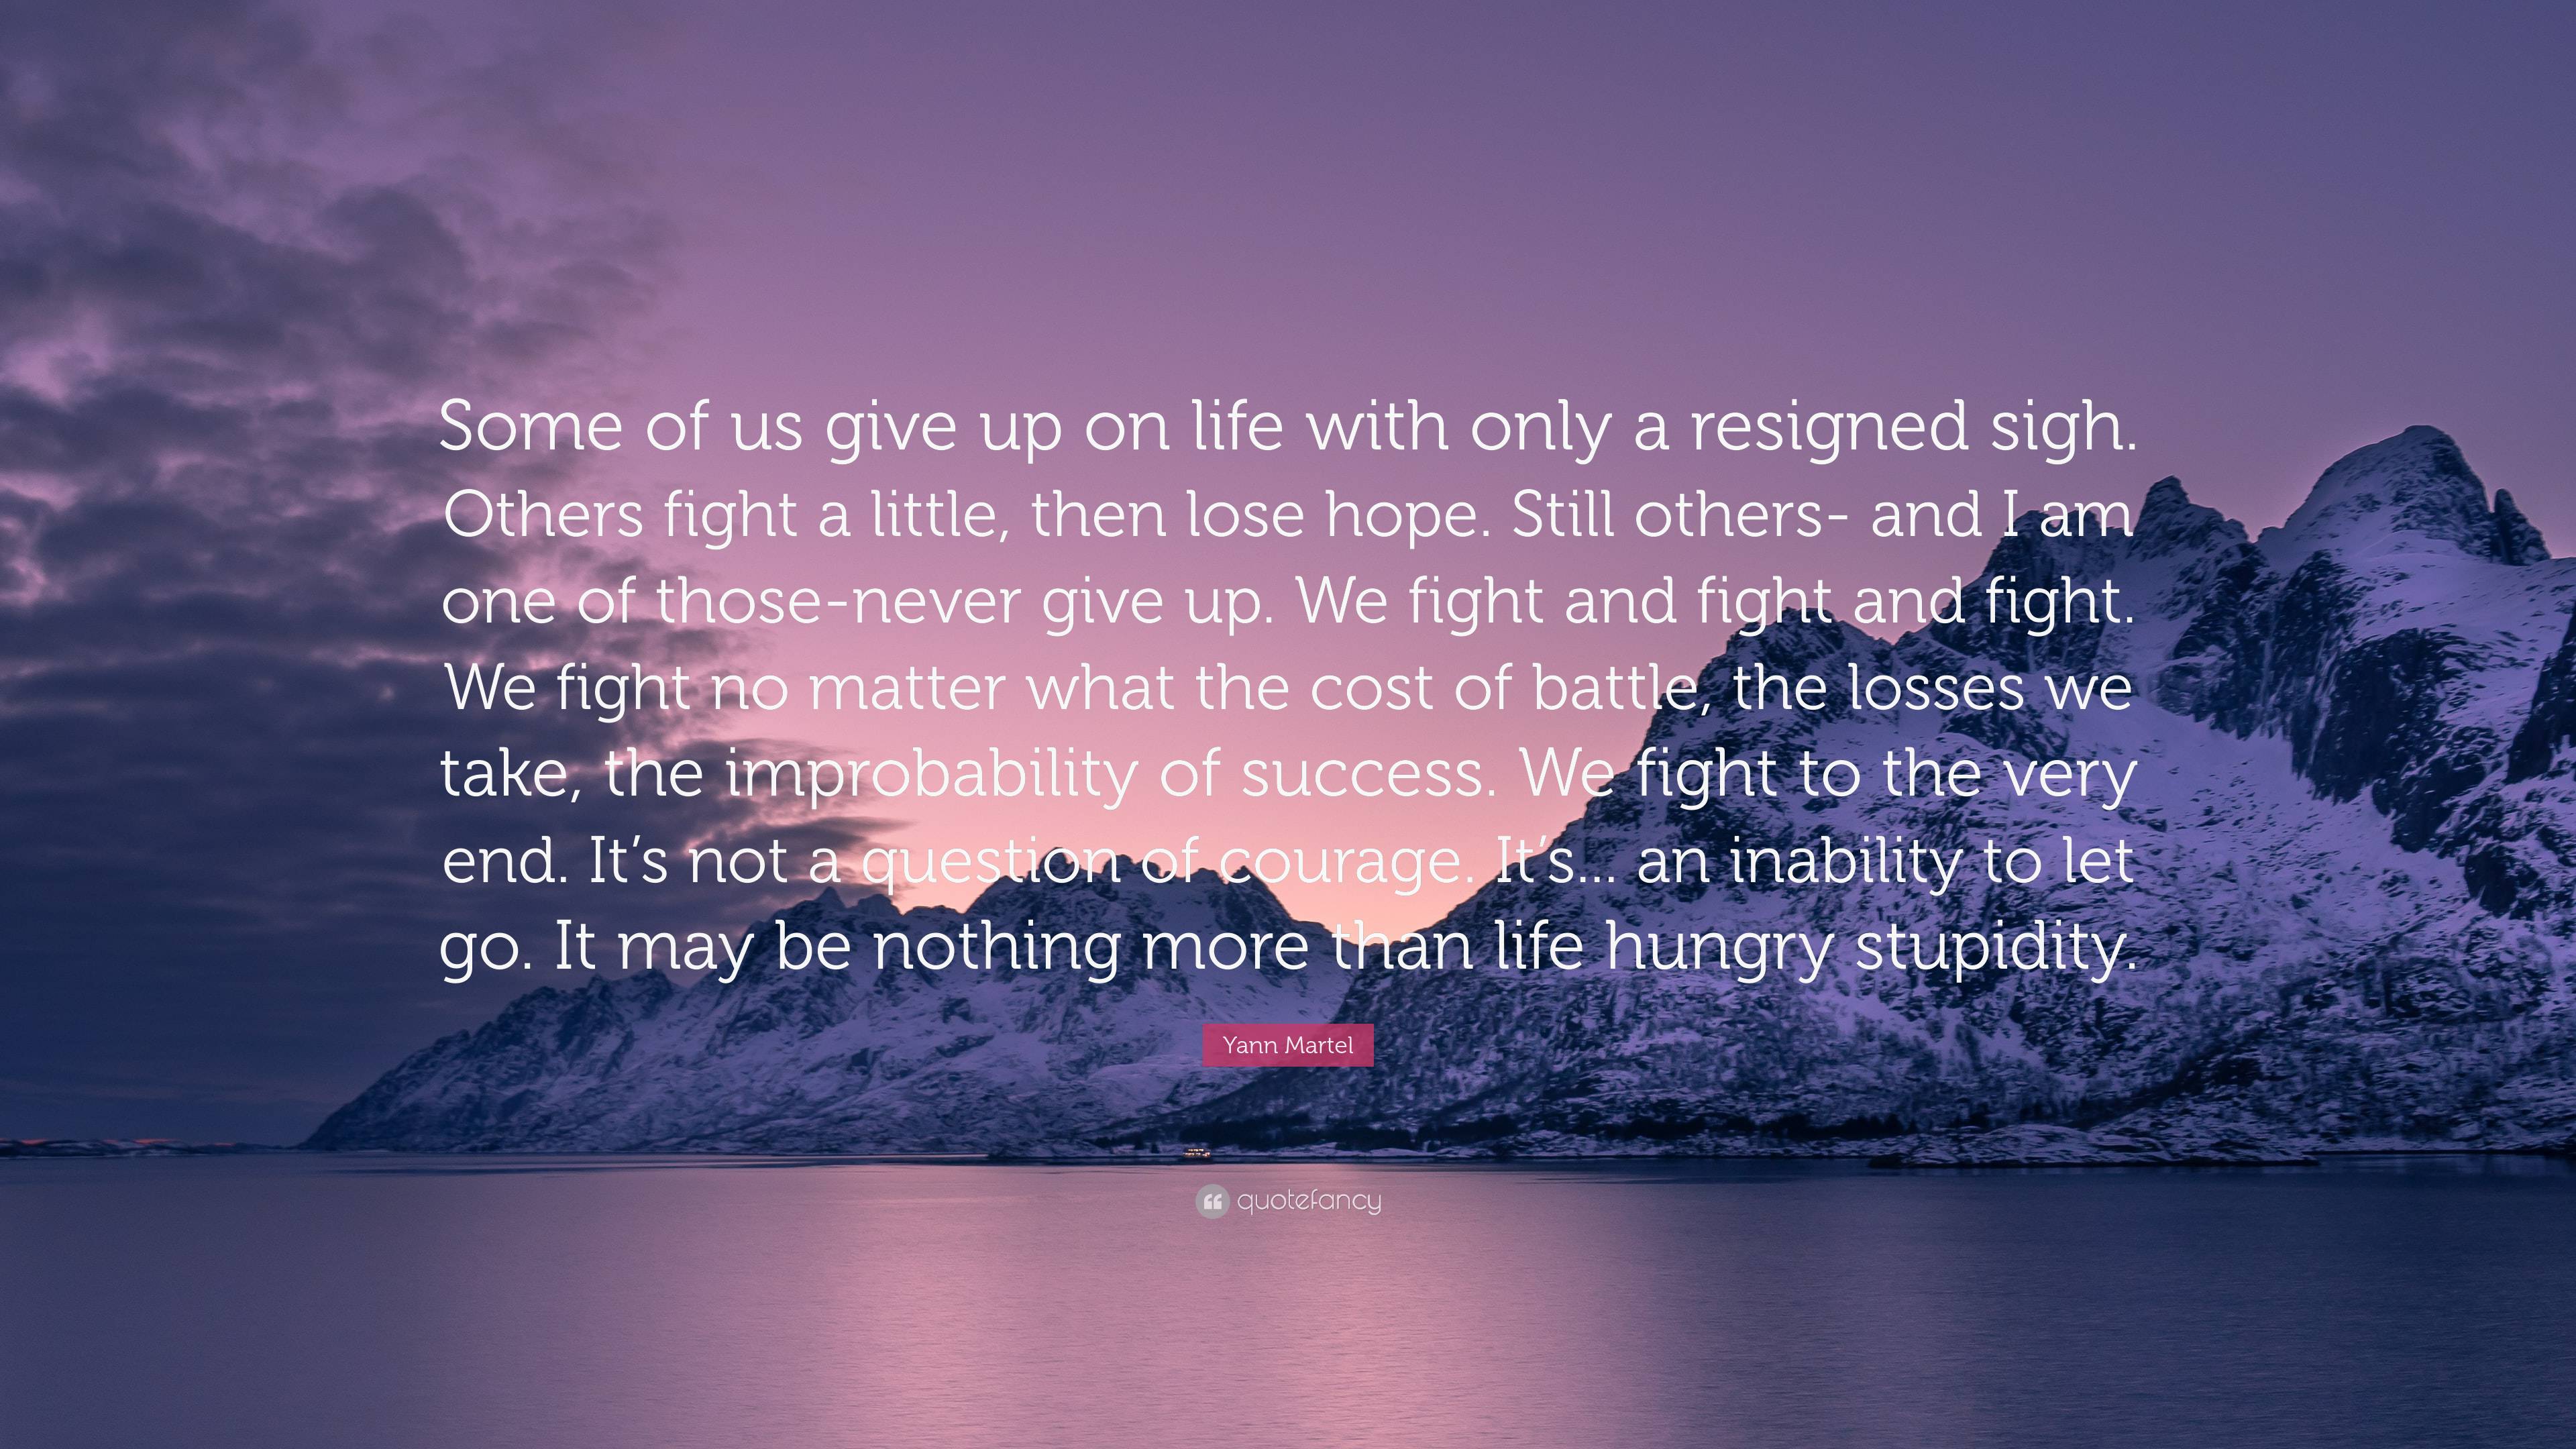 Yann Martel Quote: “Some of us give up on life with only a resigned ...